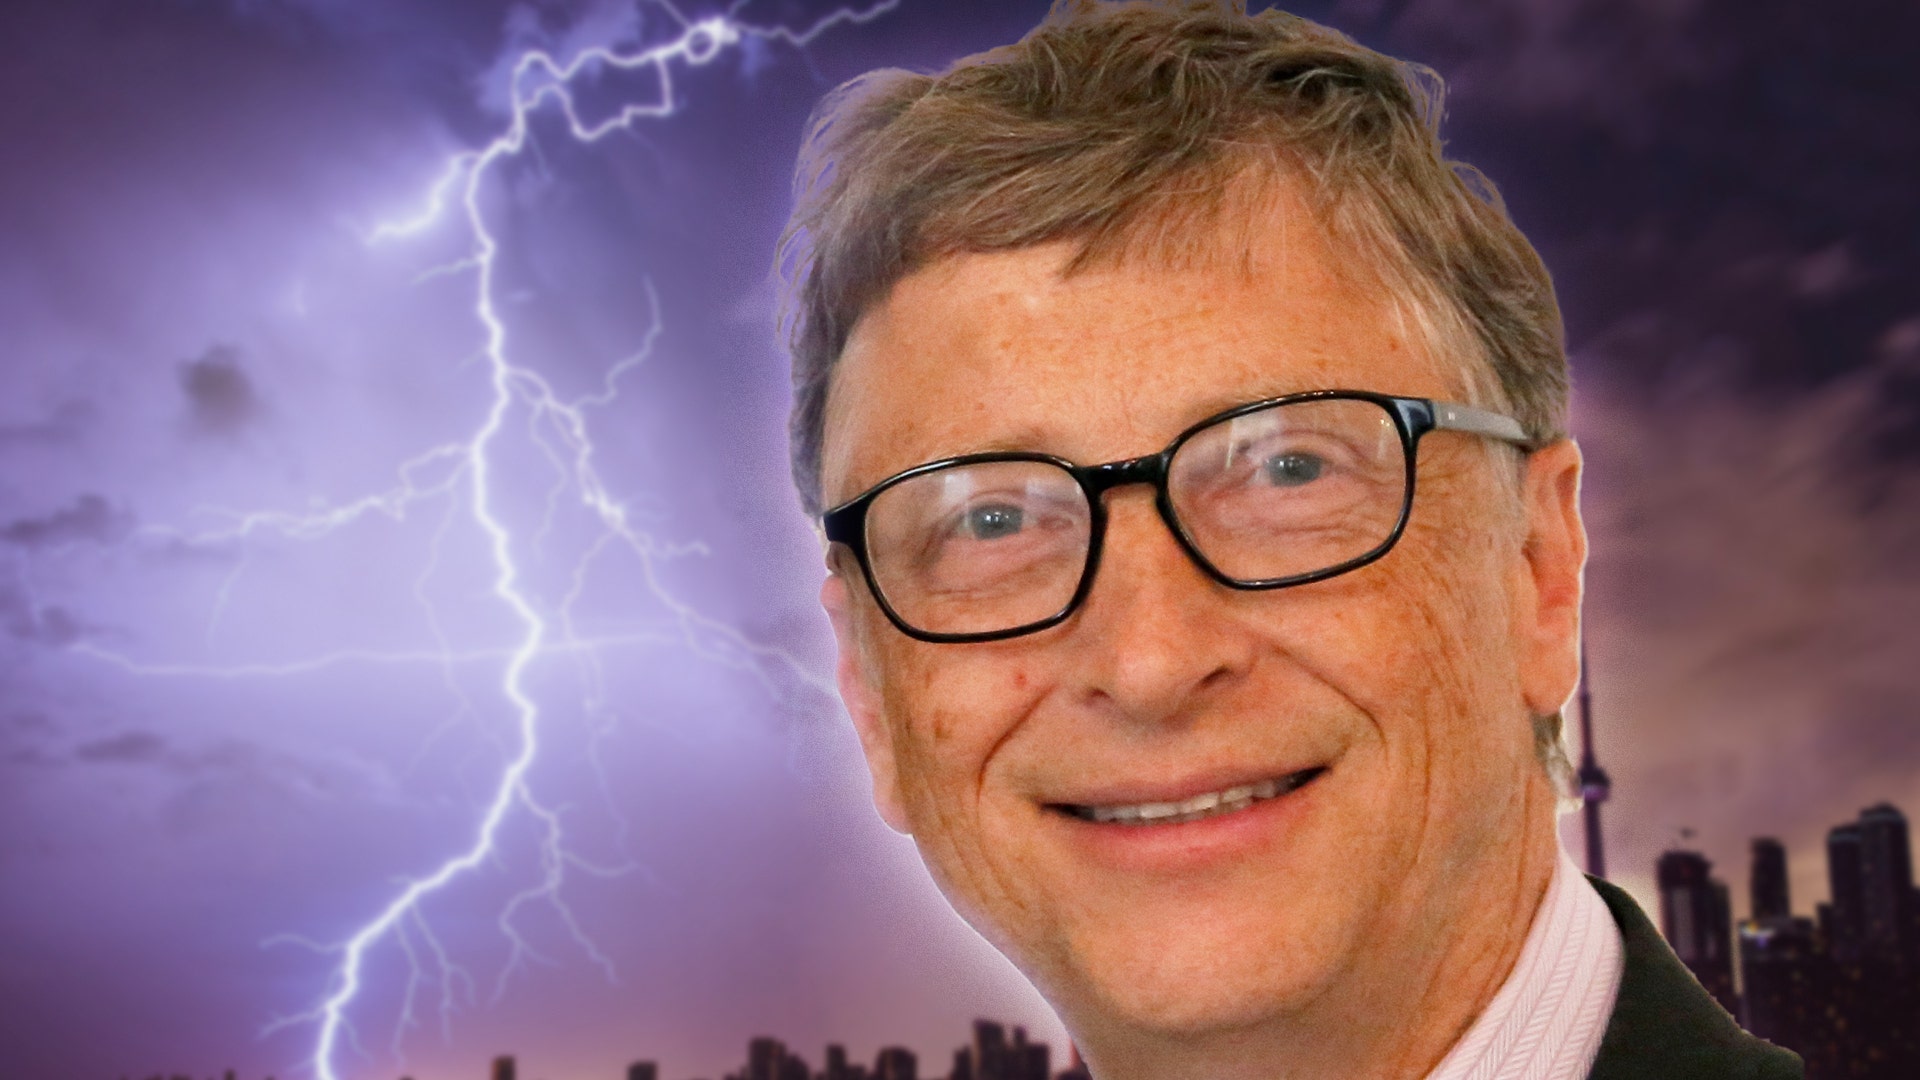 Could Bill Gates Have Stopped Hurricane Ian? His Patented Machine Aims To Control Storms